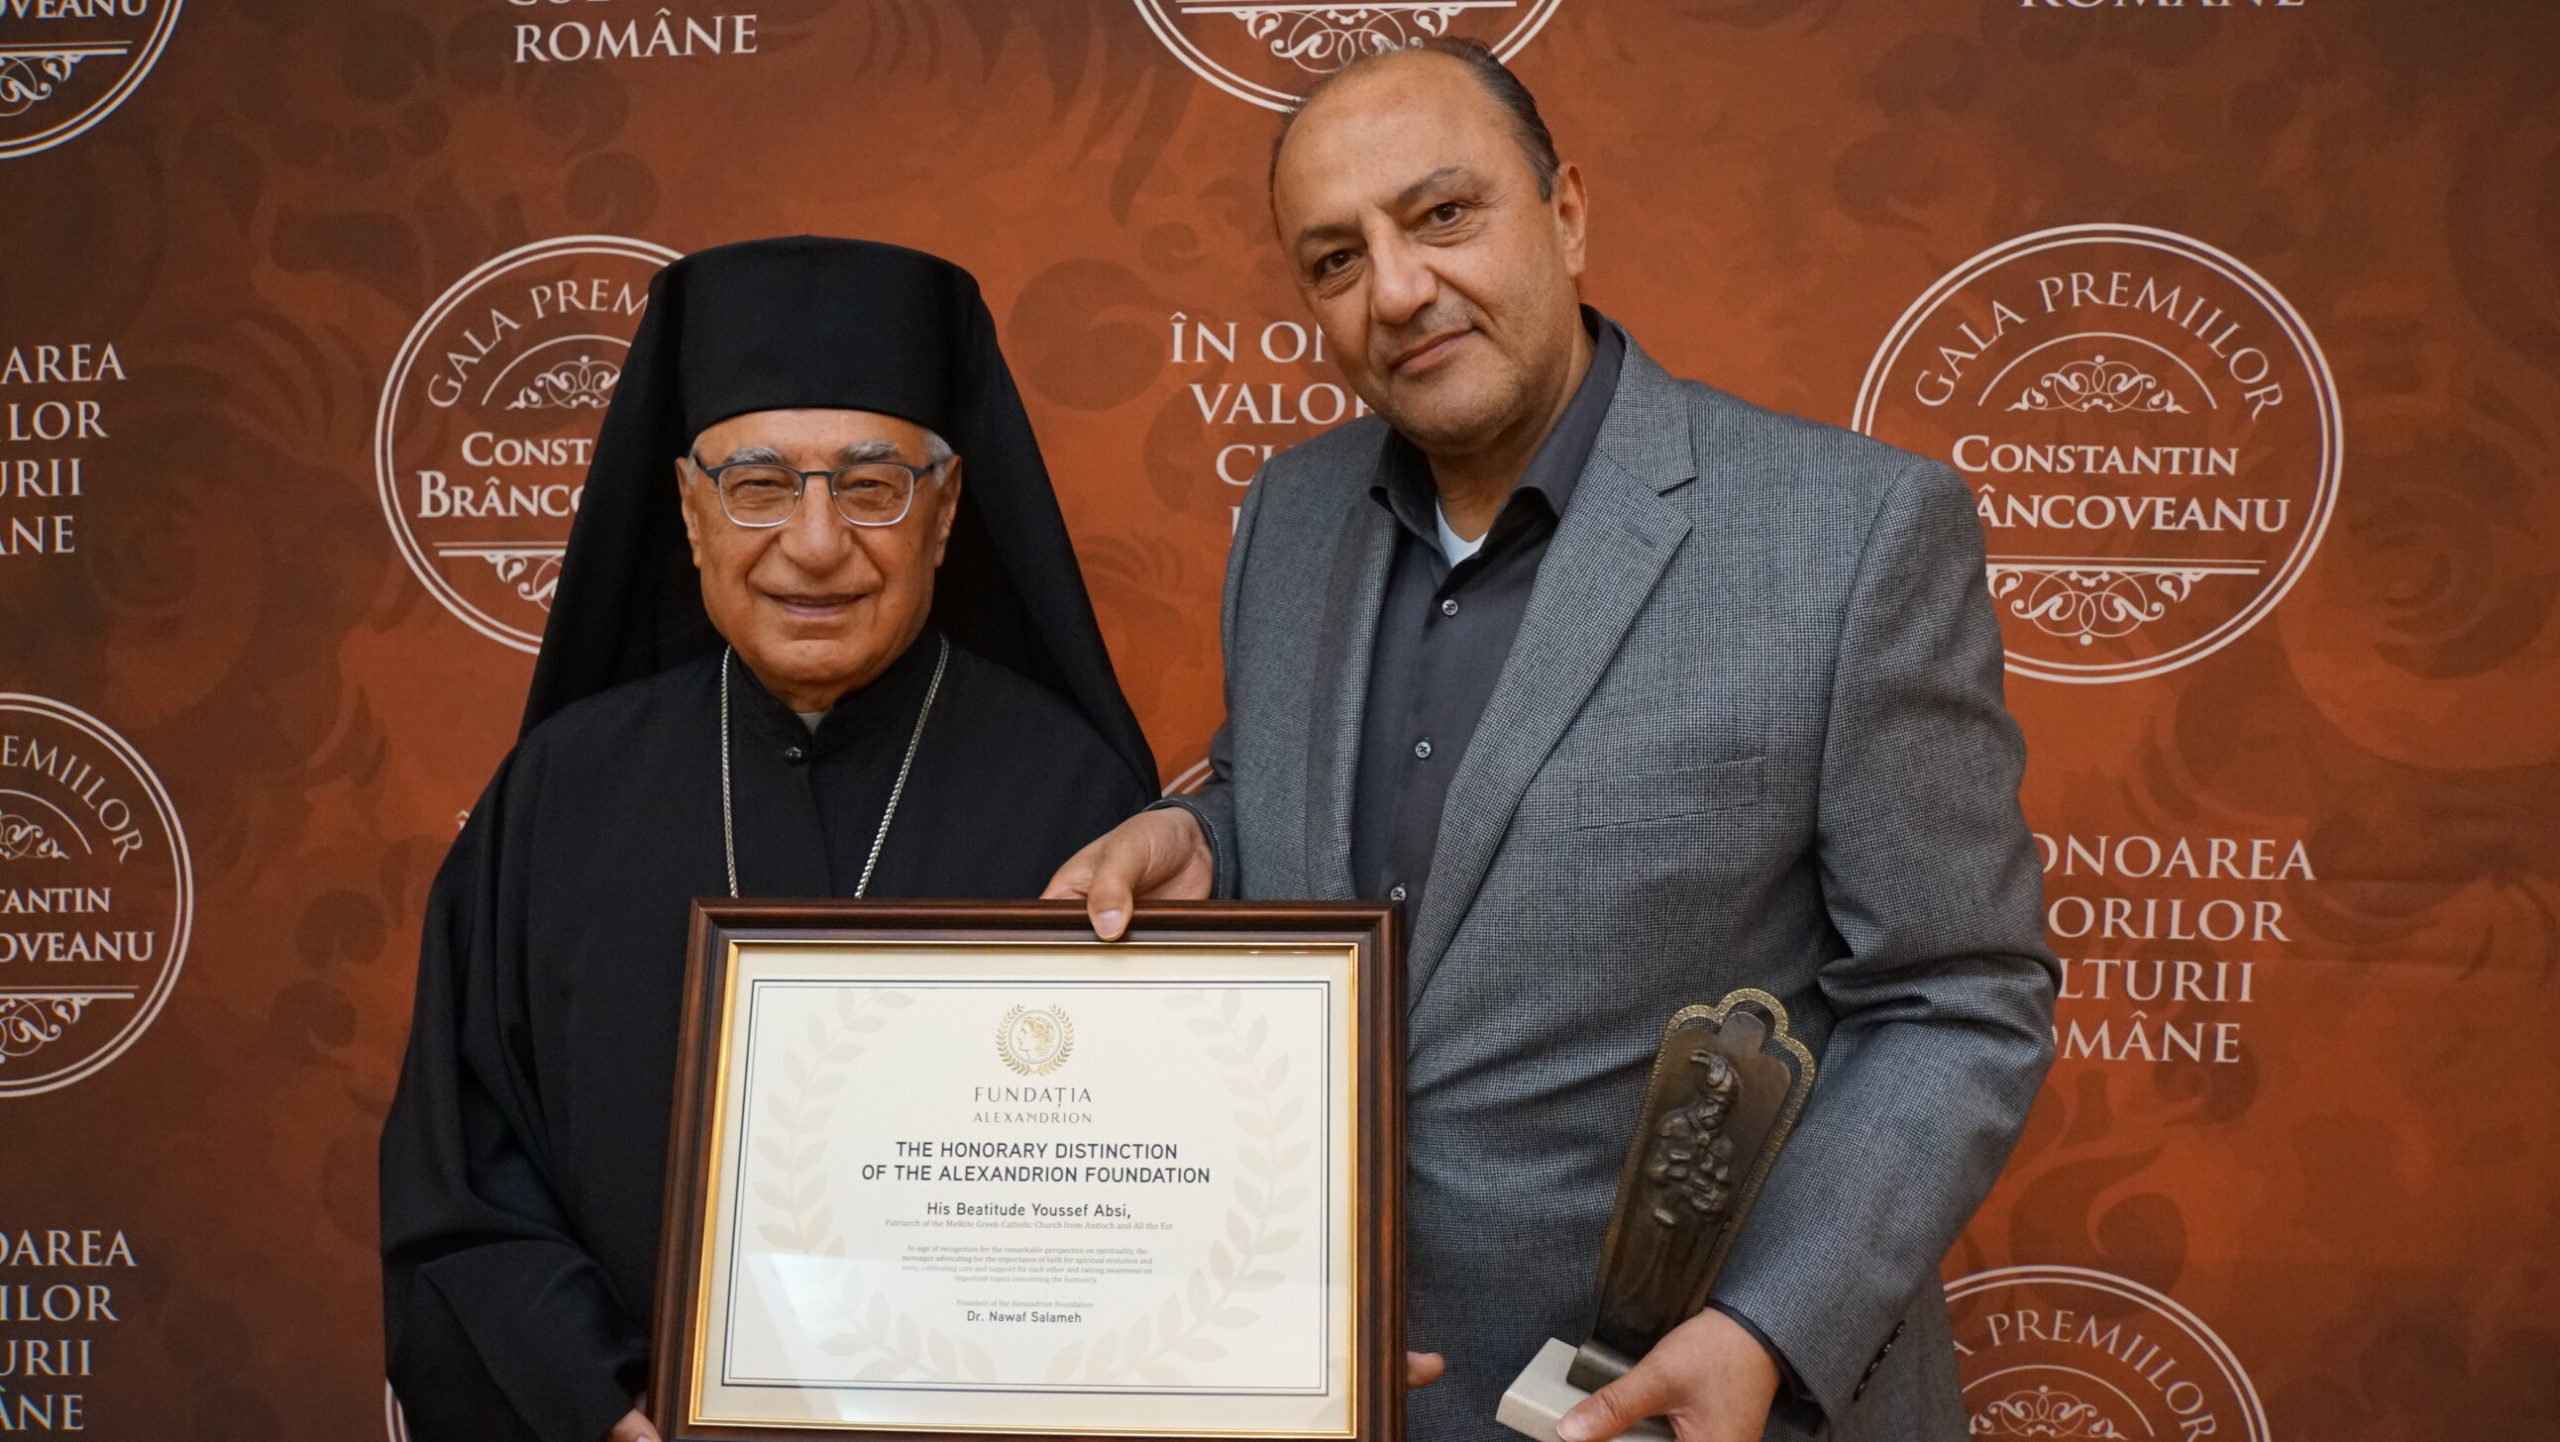 Historical visit: His Beatitude Youssef Absi, the Patriarch of the Greek Melkite Catholic Church from Antioch and All the East visited Romania upon the invitation of the Alexandrion Foundation